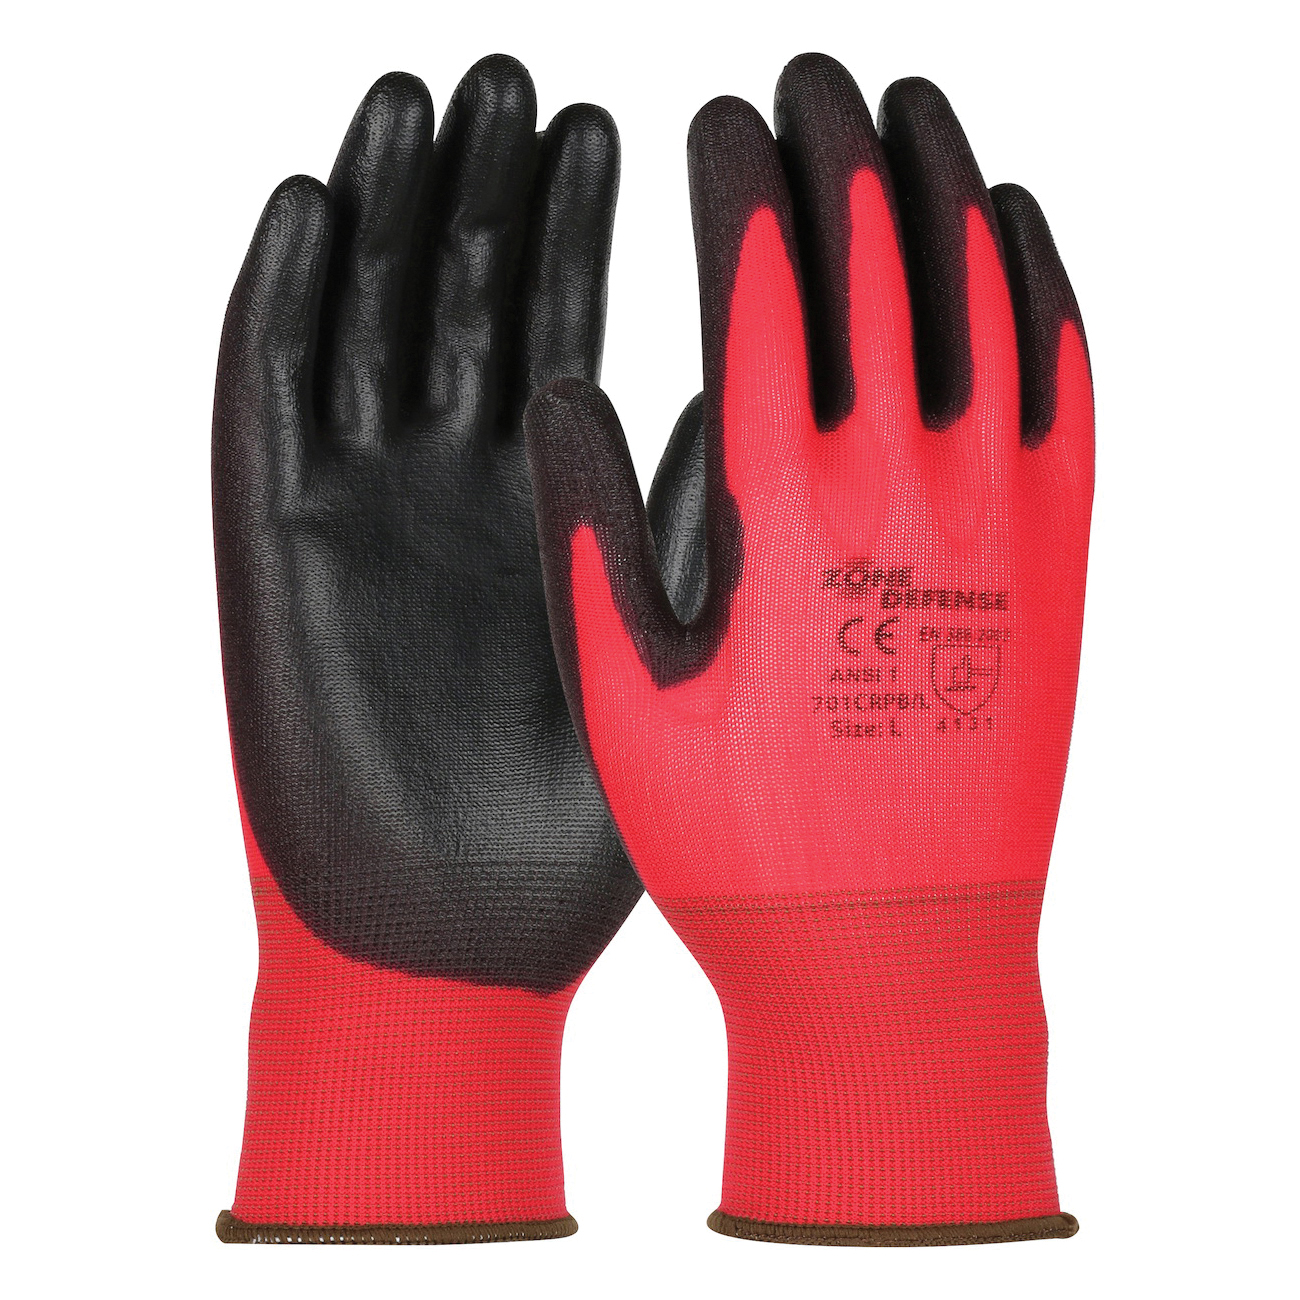 PIP® 701CRPB/XXL Unisex General Purpose Gloves, Coated/Work, Seamless Style, 2XL, Polyurethane Palm, Nylon, Black/Red, Ribbed Knit Wrist Cuff, Polyurethane Coating, Resists: Cut and Puncture